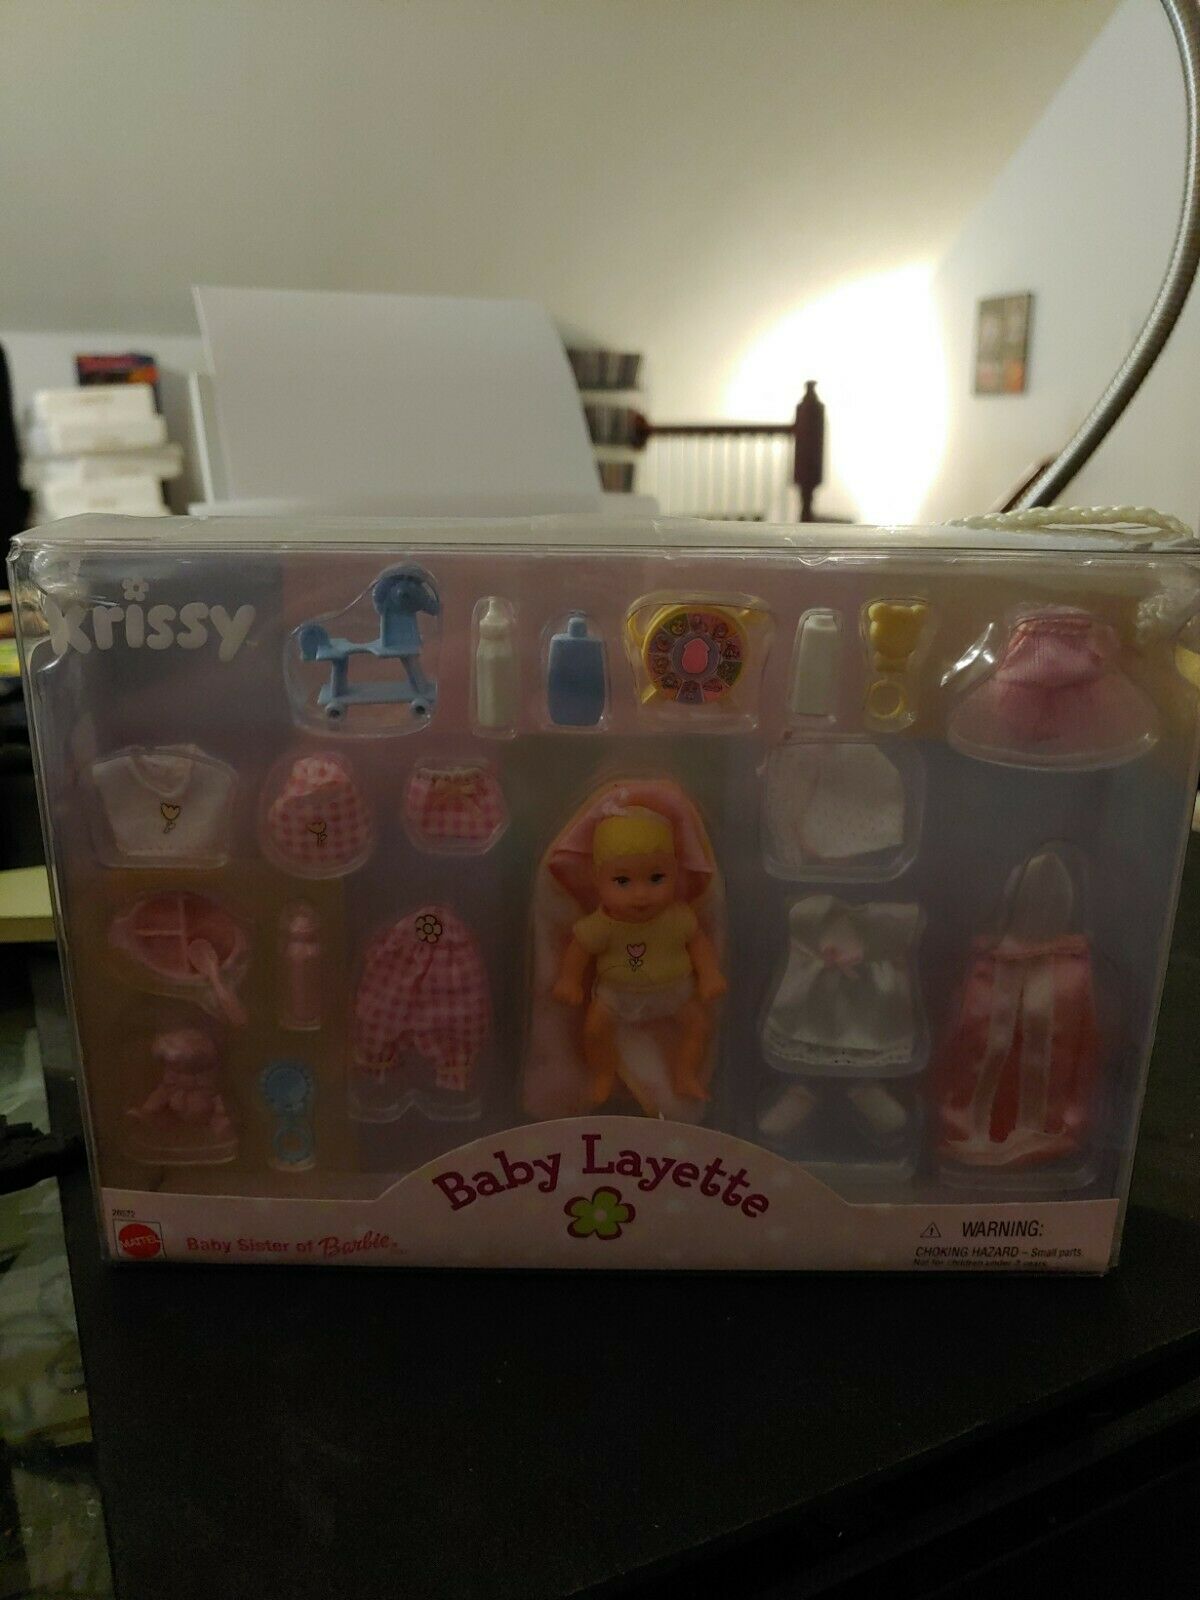 Krissy Baby Layette Clothes Accessories Baby Sister Of Barbie 1999 Mattel New